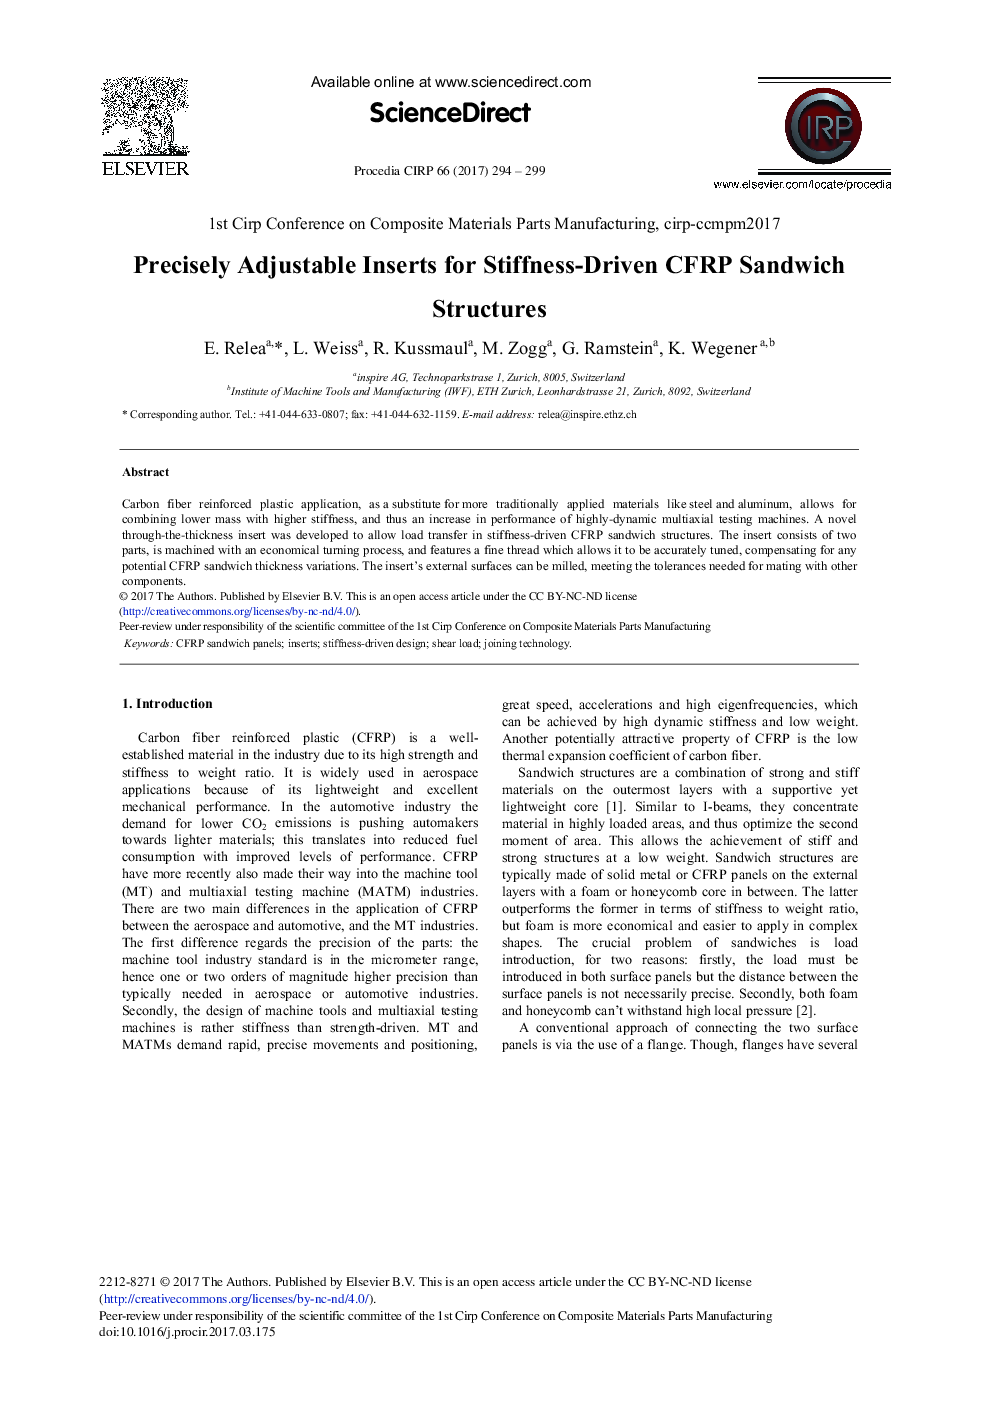 Precisely Adjustable Inserts for Stiffness-Driven CFRP Sandwich Structures